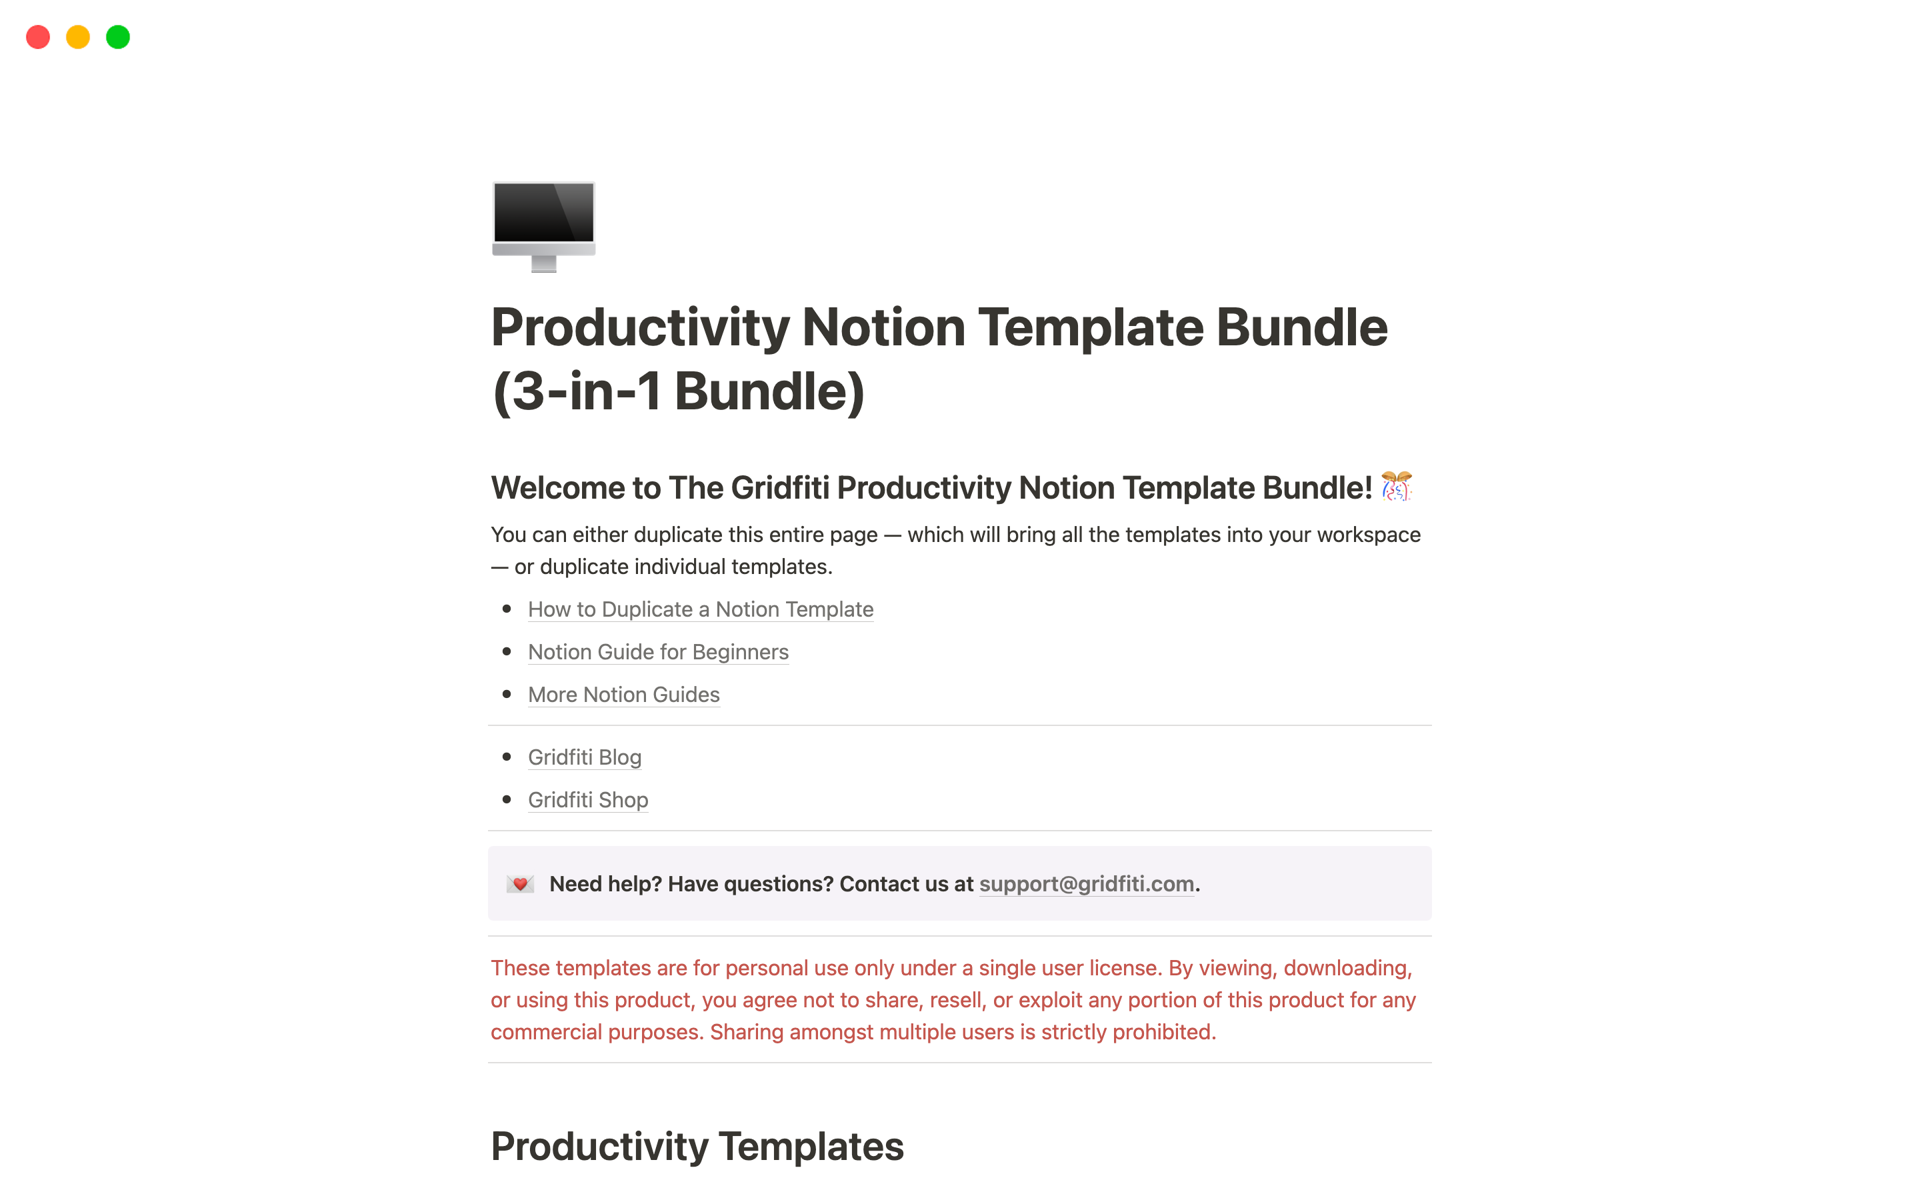 A template preview for 3-in-1 Productivity Bundle